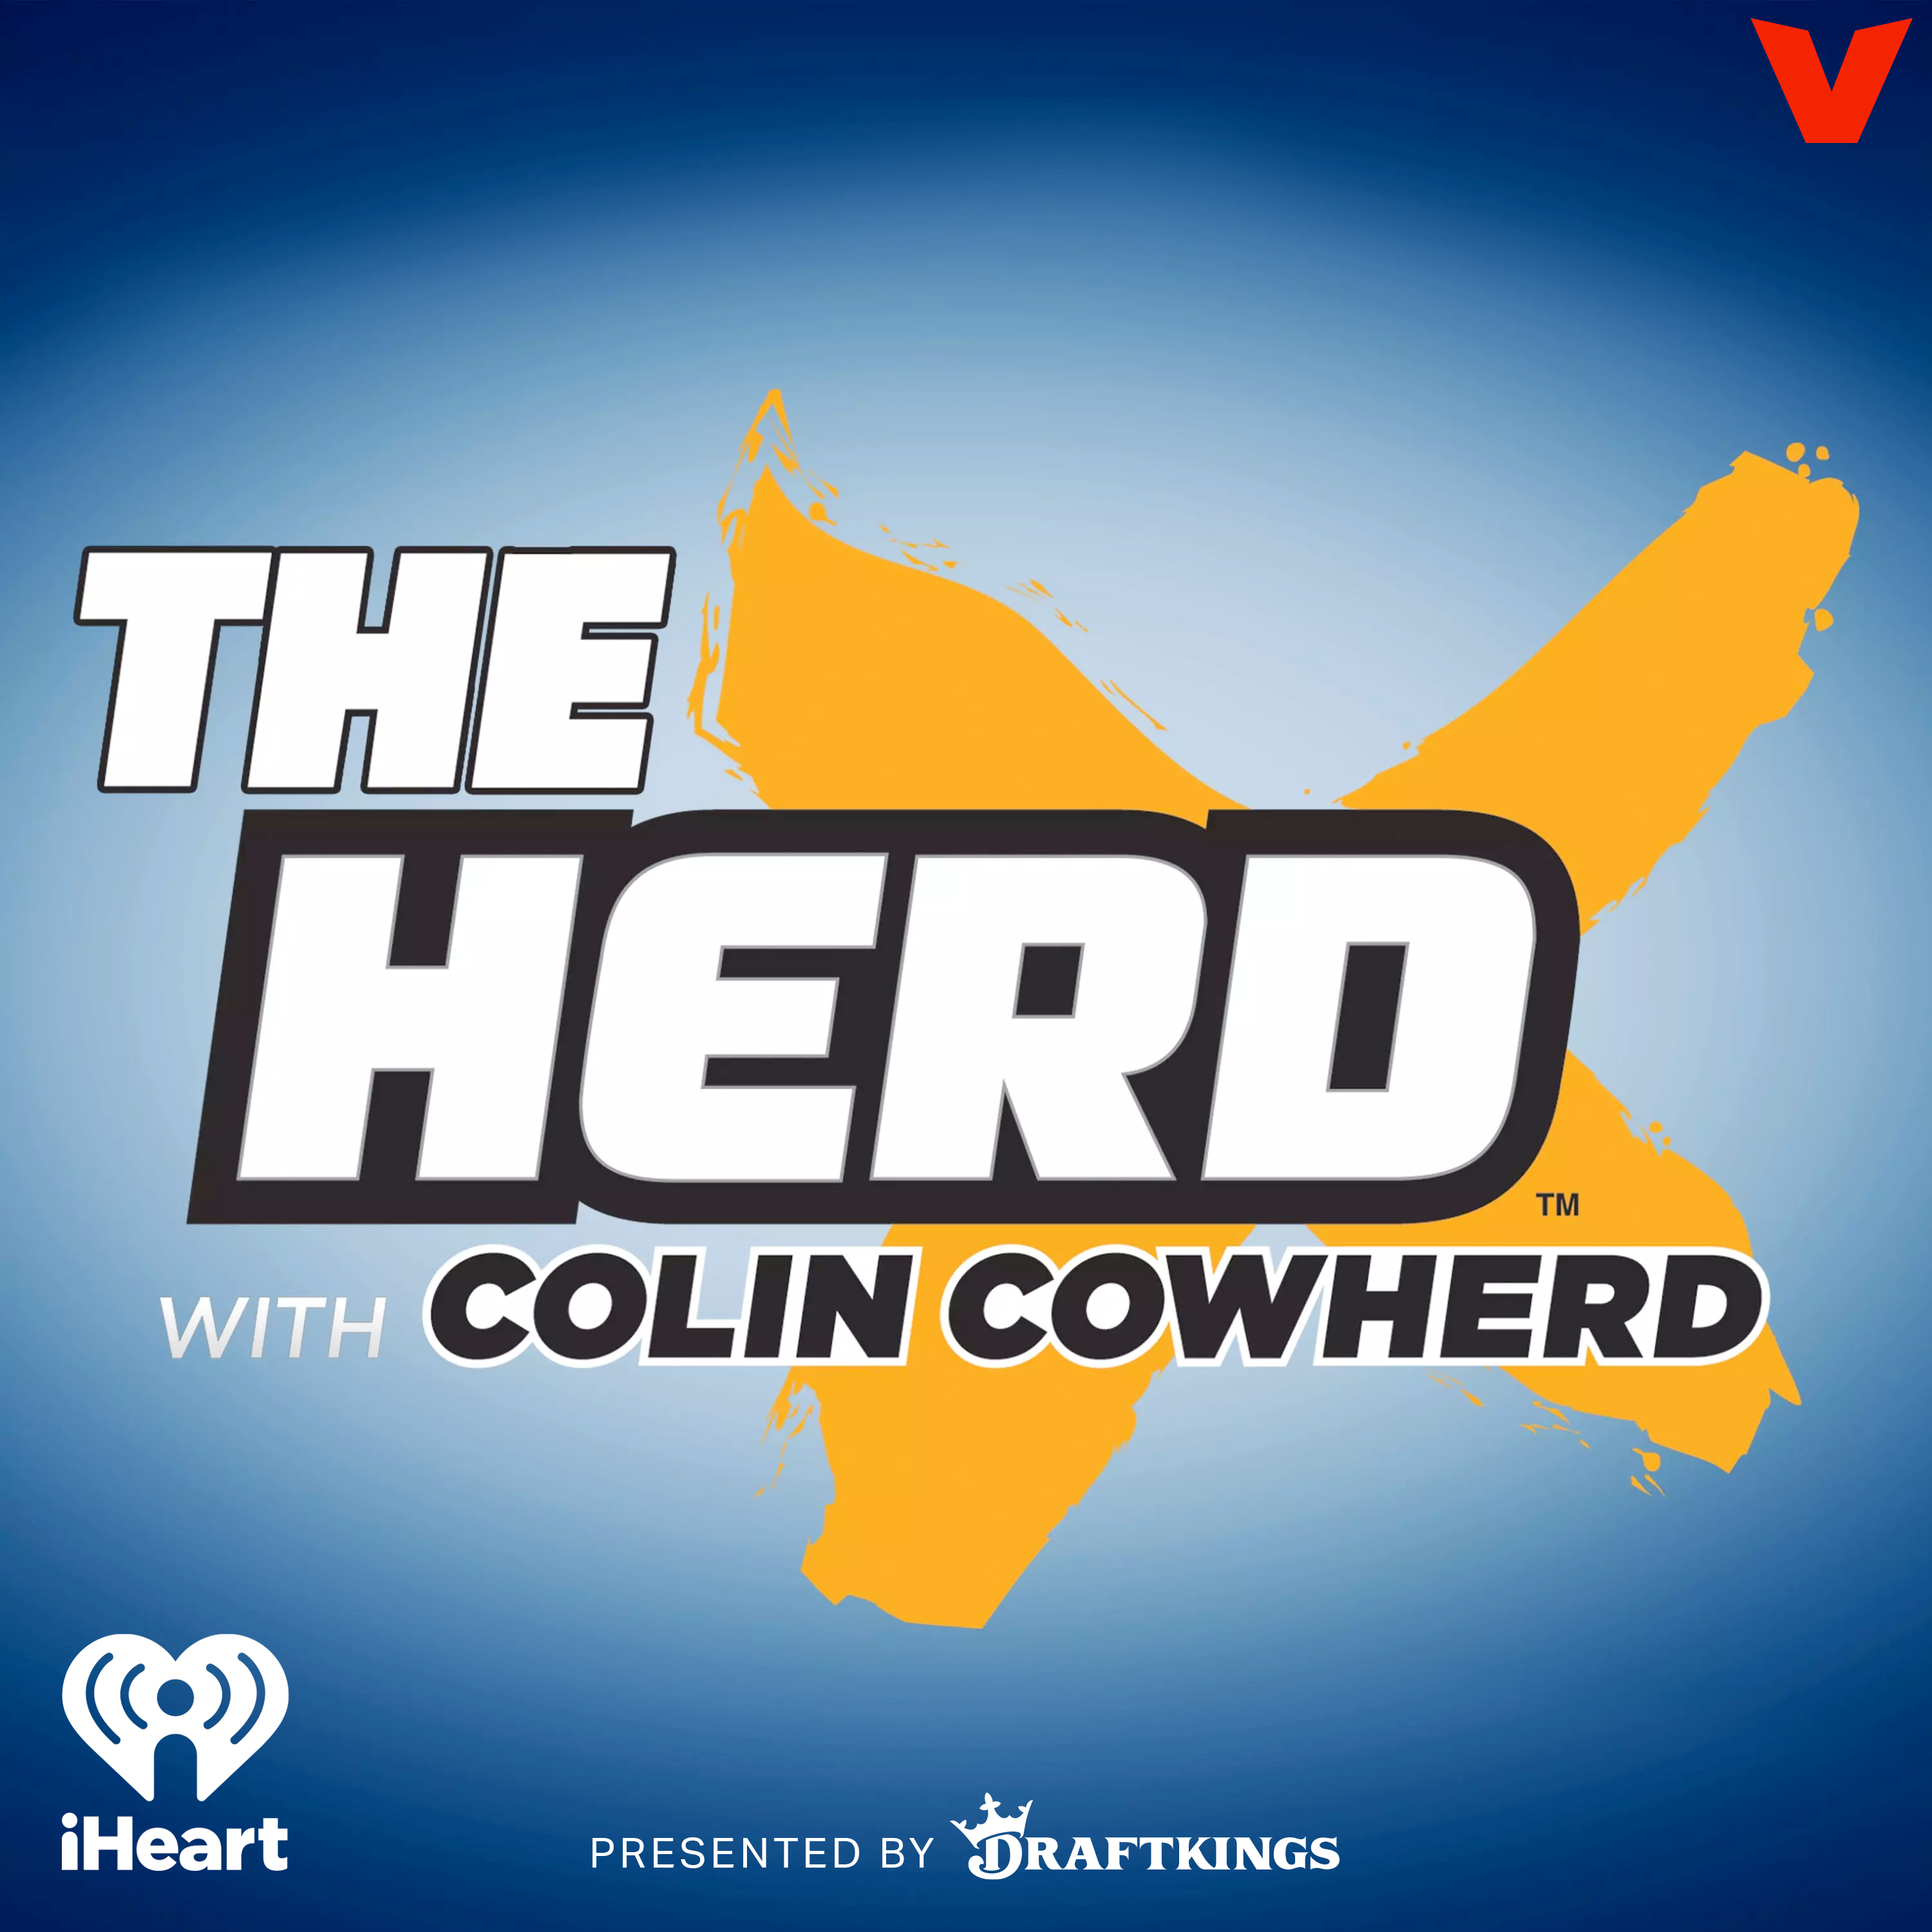 Colin Cowherd Podcast - NFL Week 12 Picks and Betting Breakdown, 'Fake Q's, Real Answers' on Belichick and USC